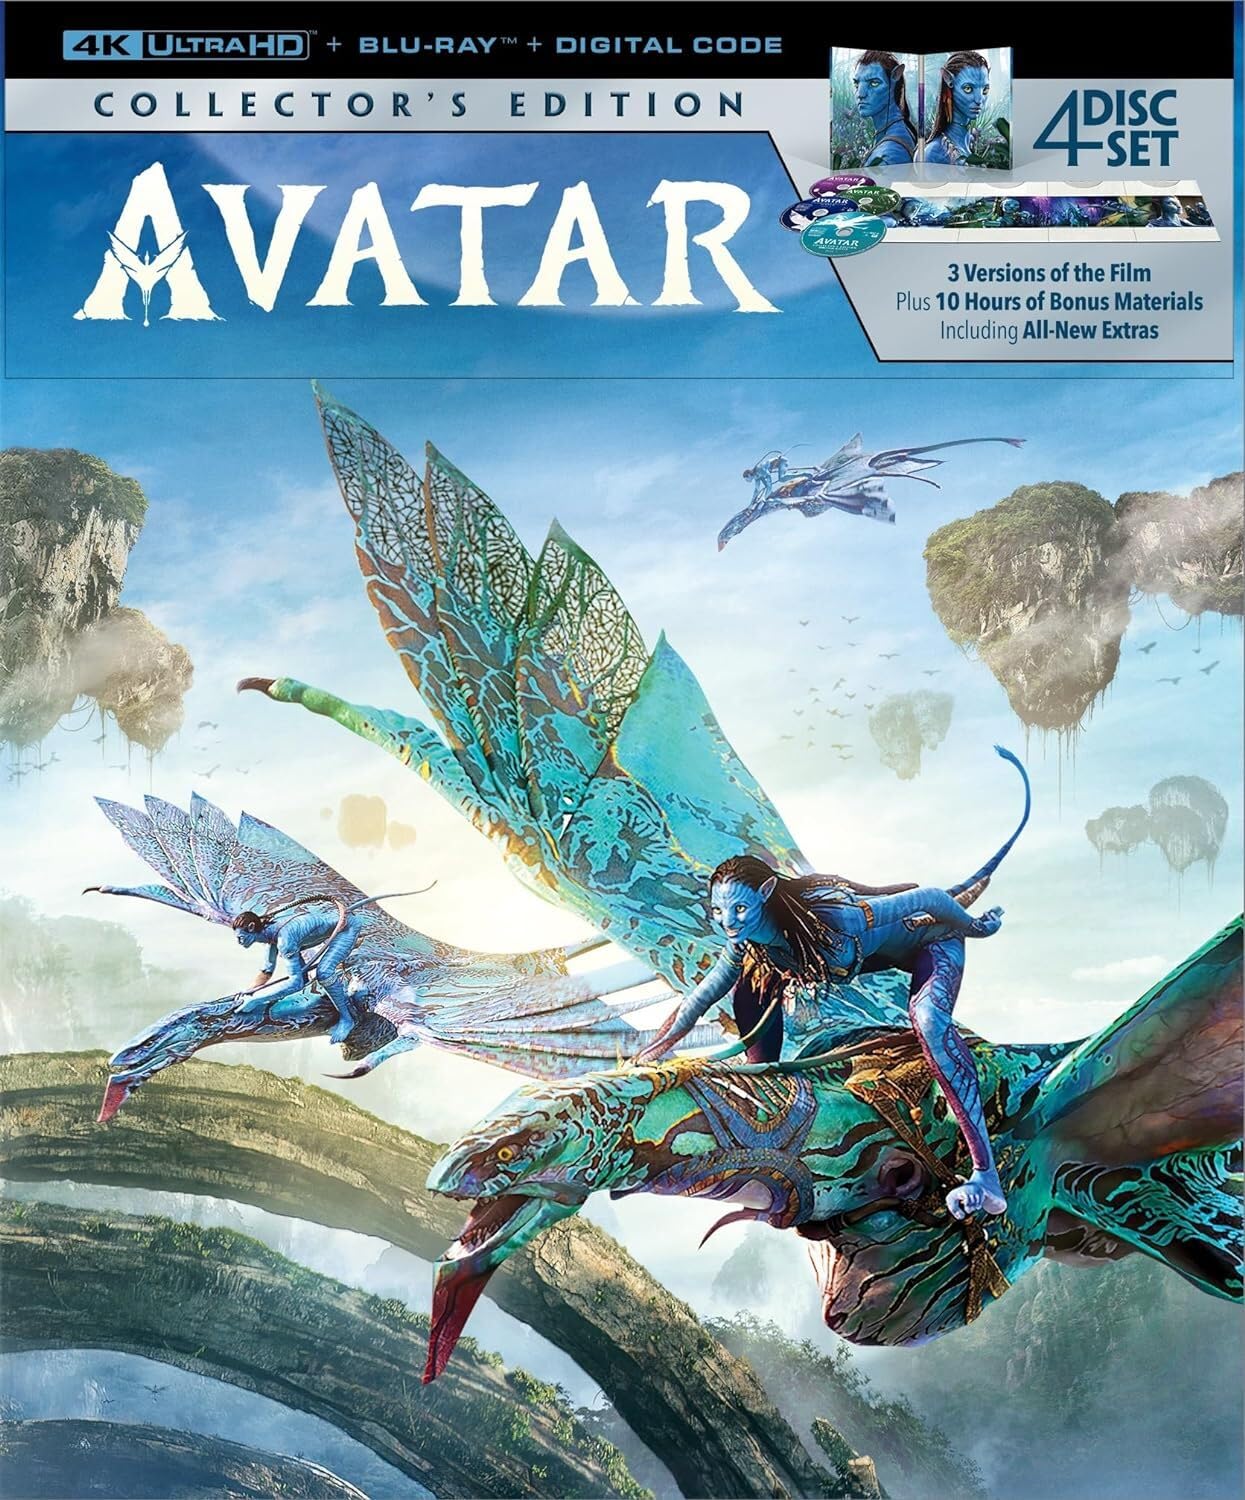 AVATAR (COLLECTOR'S EDITION)